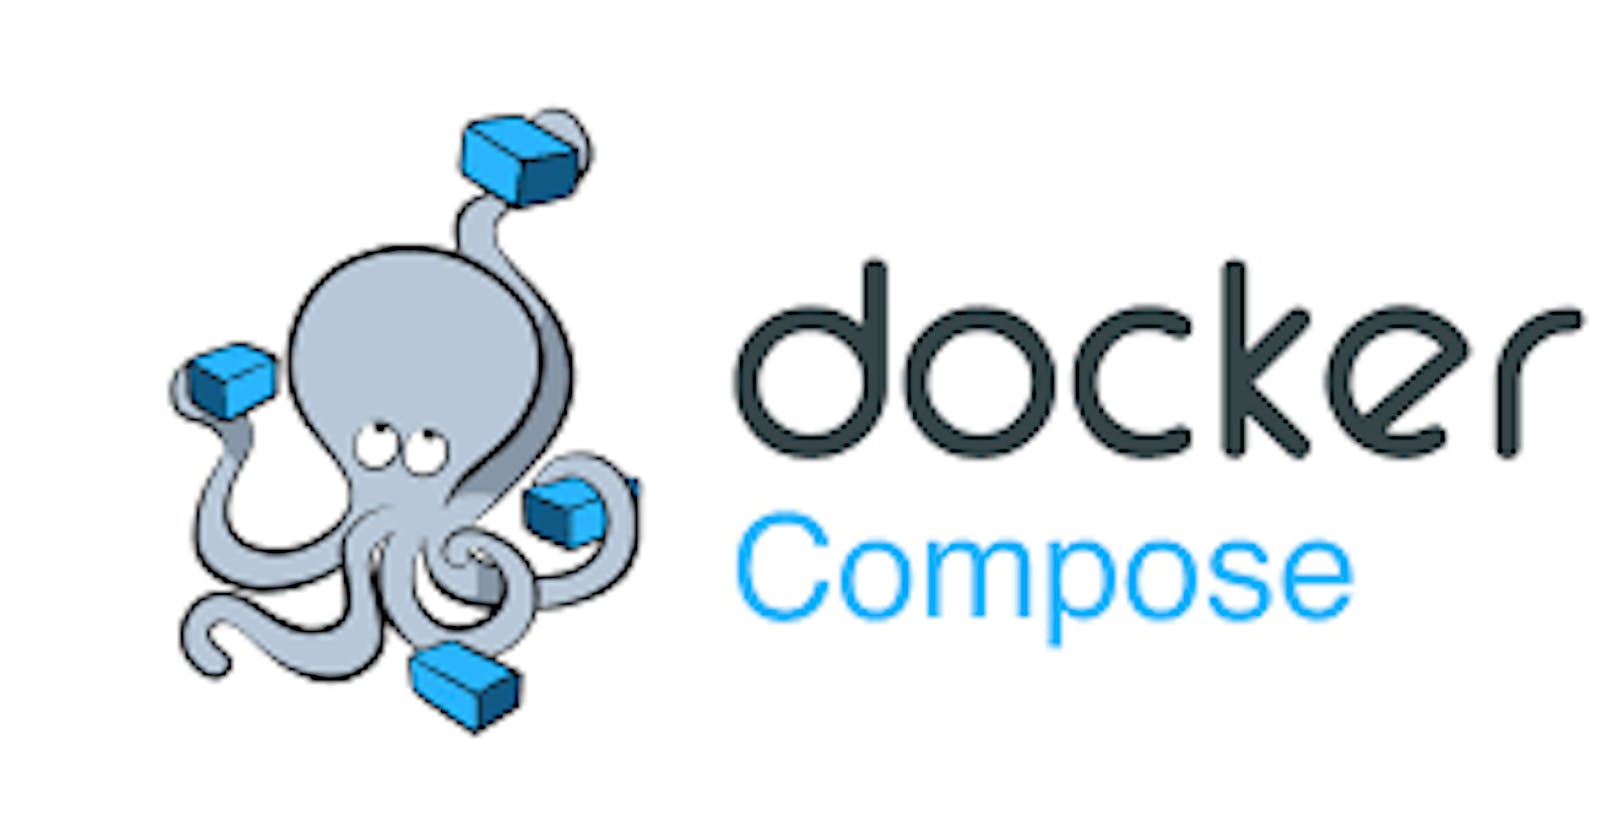 How to install Docker-compose on Deepin OS 20.9 or any other Debian-based Linux distribution via the terminal emulator?